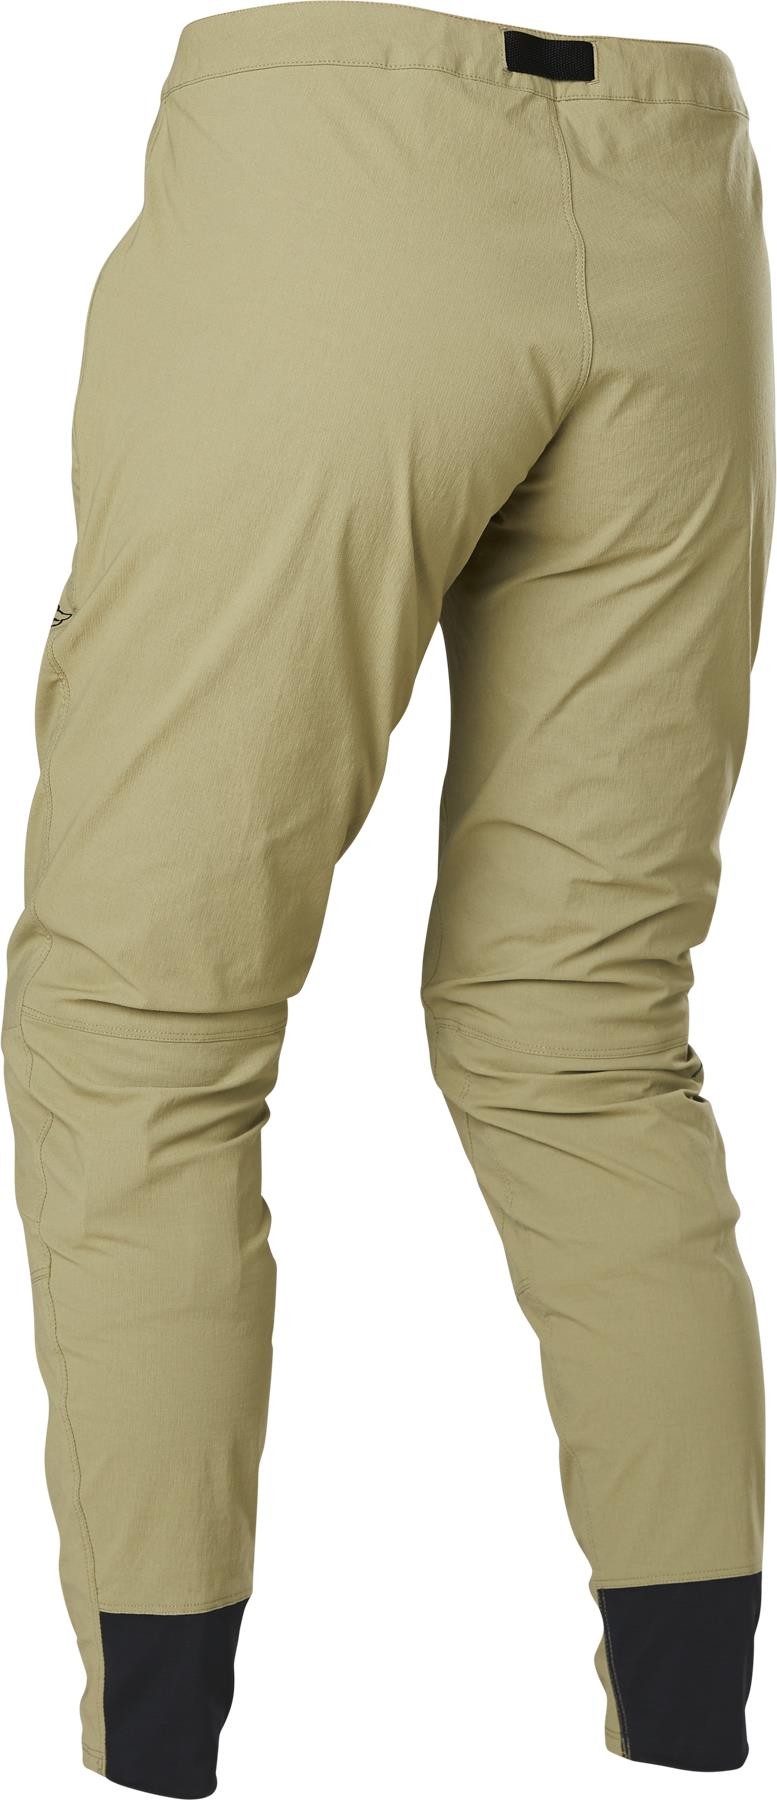 Ranger Womens MTB Cycling Trousers image 1